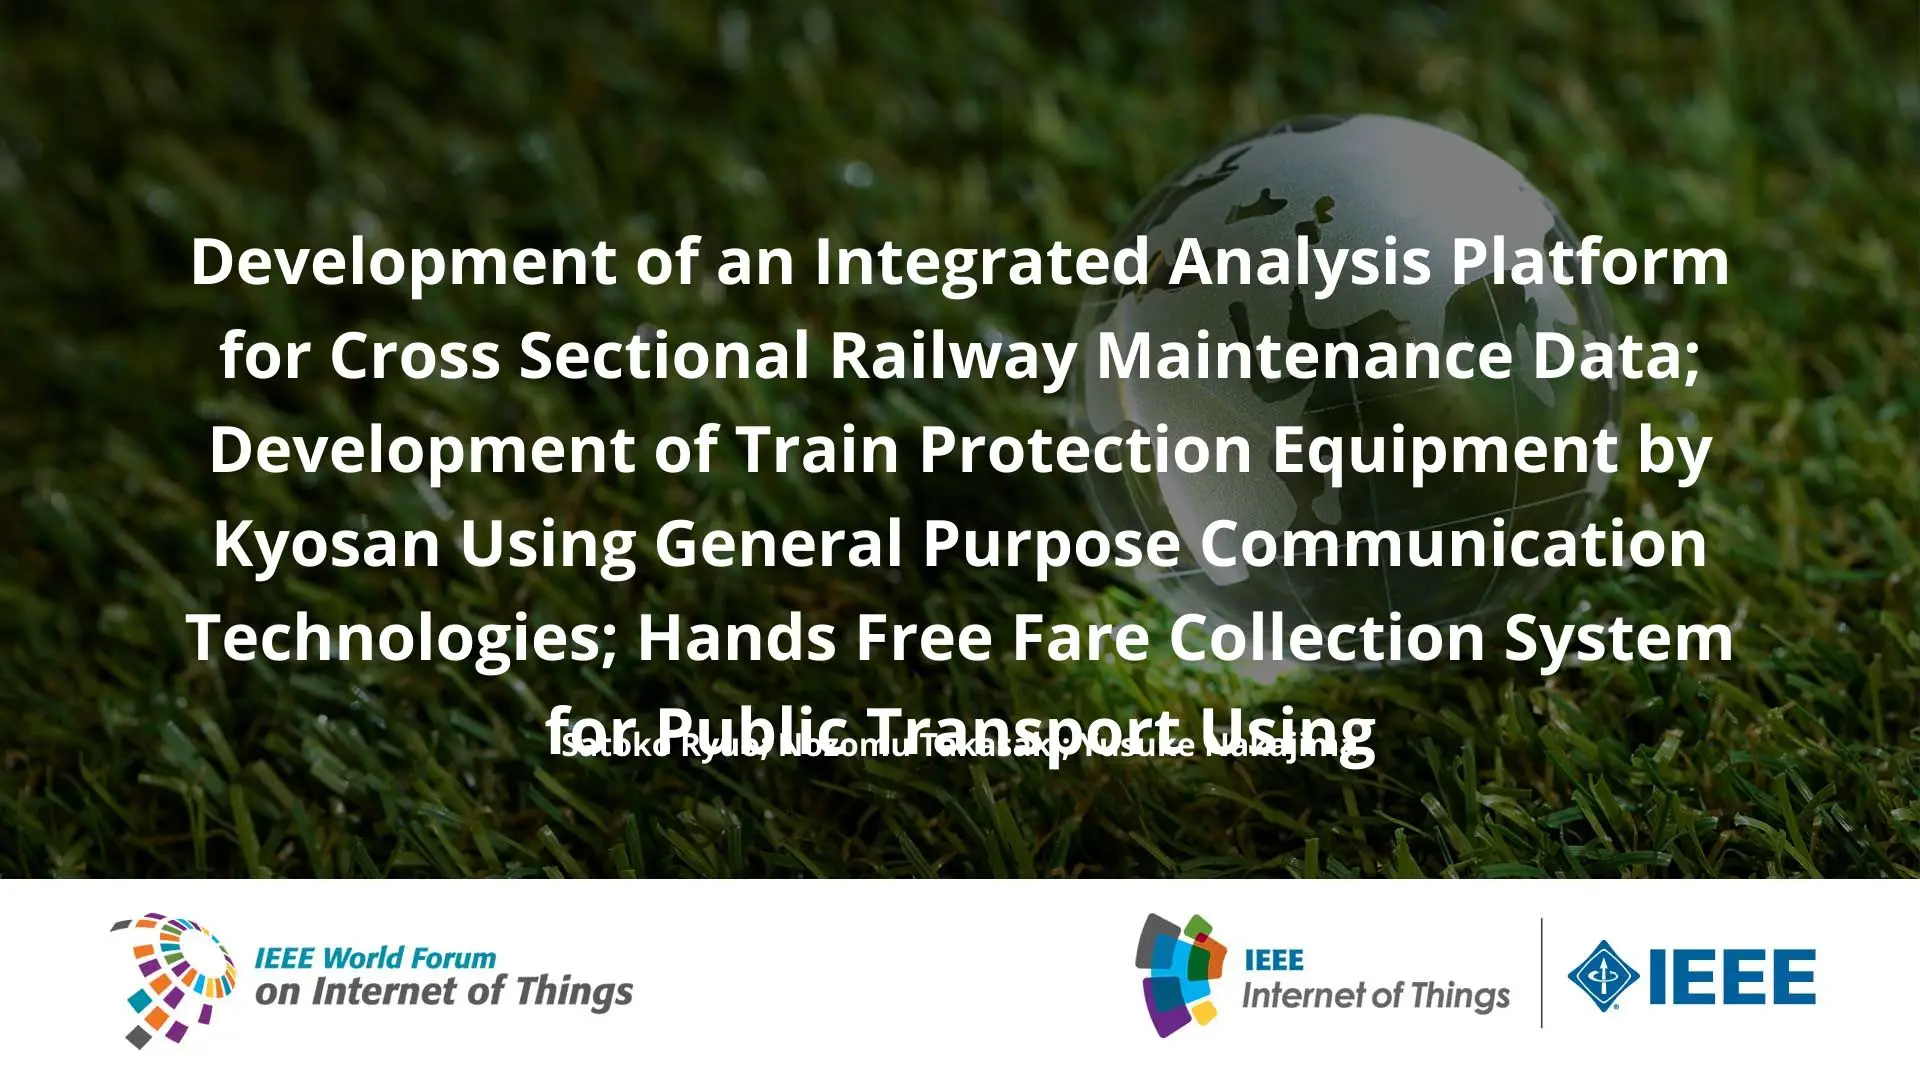 Development of an Integrated Analysis Platform for Cross Sectional Railway Maintenance Data; Development of Train Protection Equipment by Kyosan Using General Purpose Communication Technologies; Hands Free Fare Collection System for Public Transport Using